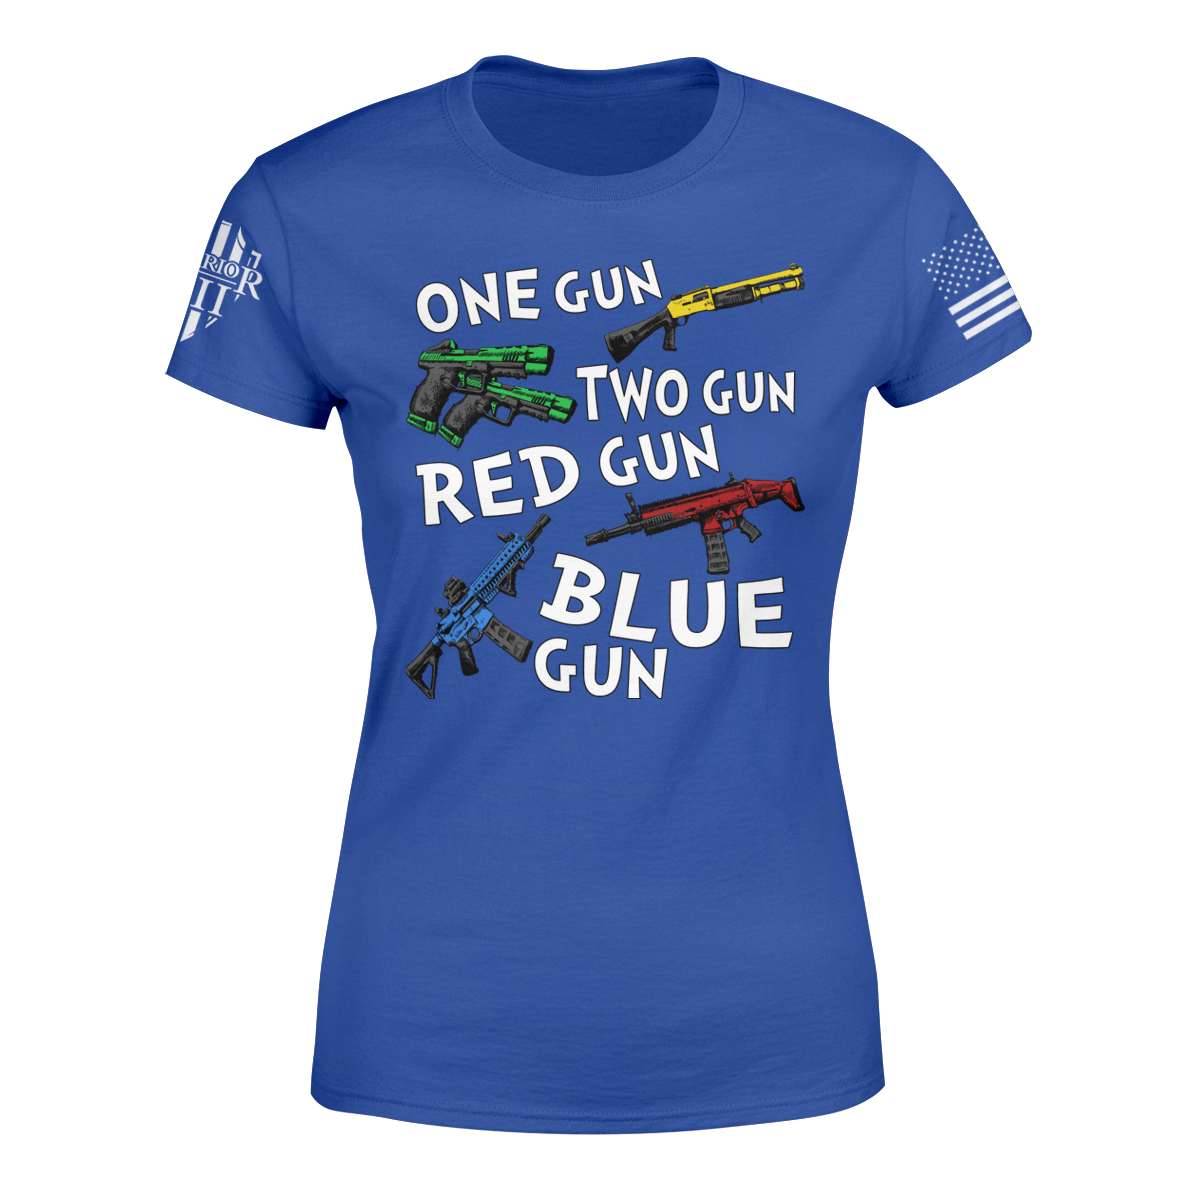 A blue women's relaxed fit'shirt with the words "One gun, two gun, red gun blue gun" with colored guns printed on the front.